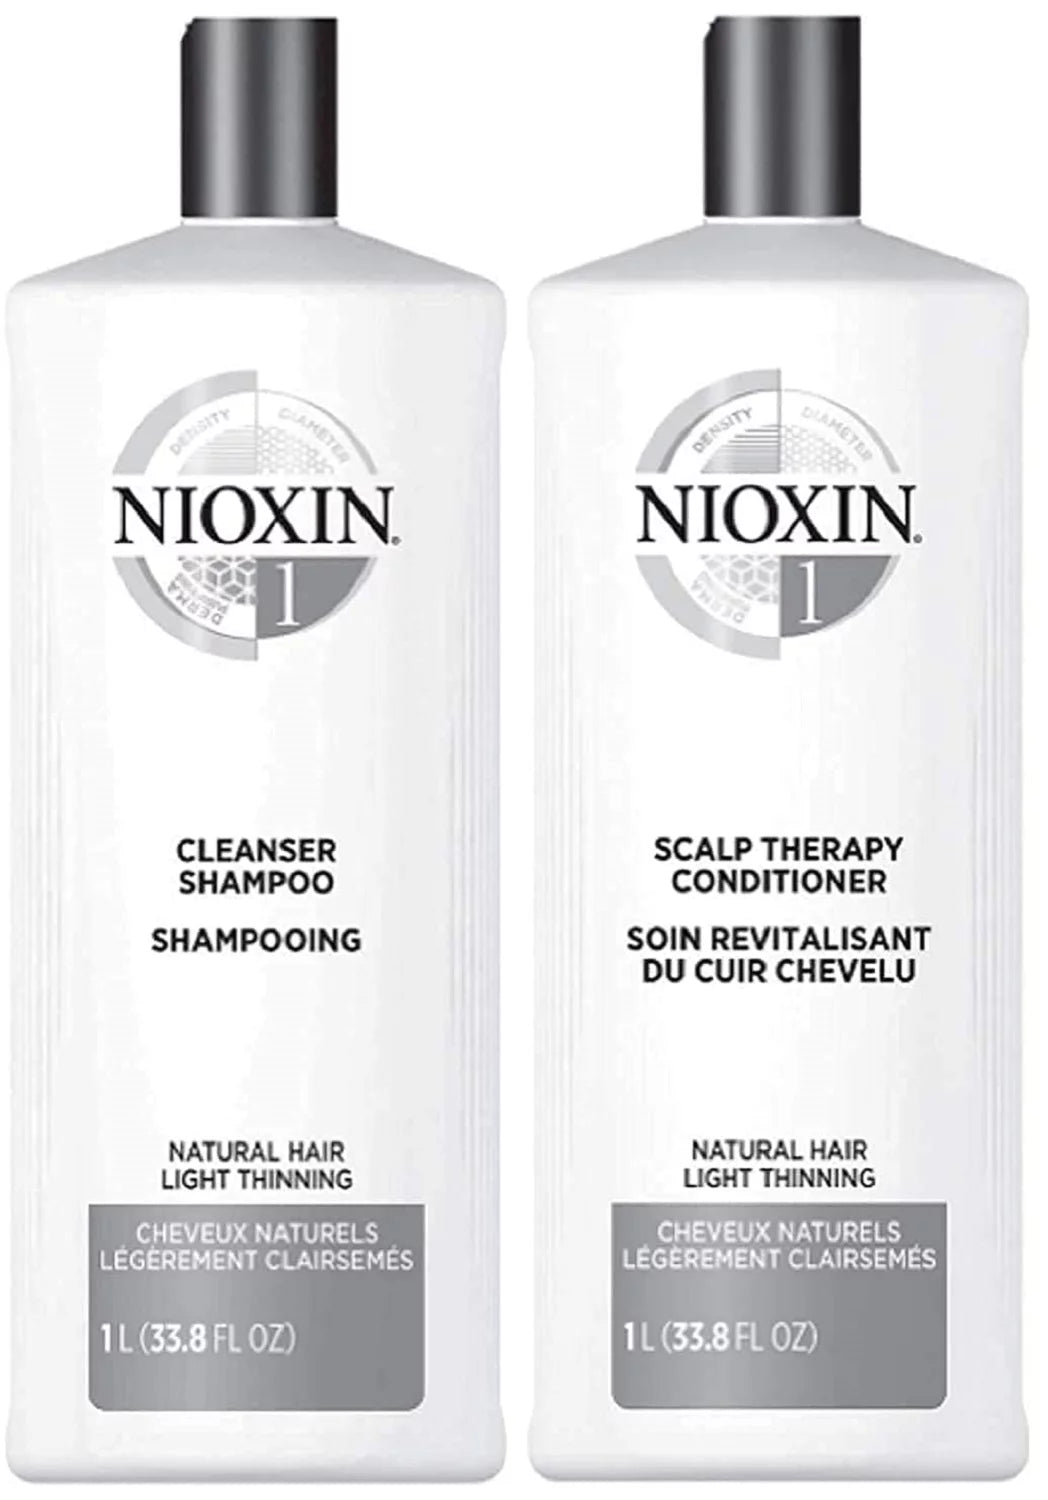 Nioxin System 1 Cleanser Shampoo & Scalp Therapy, 33.8oz